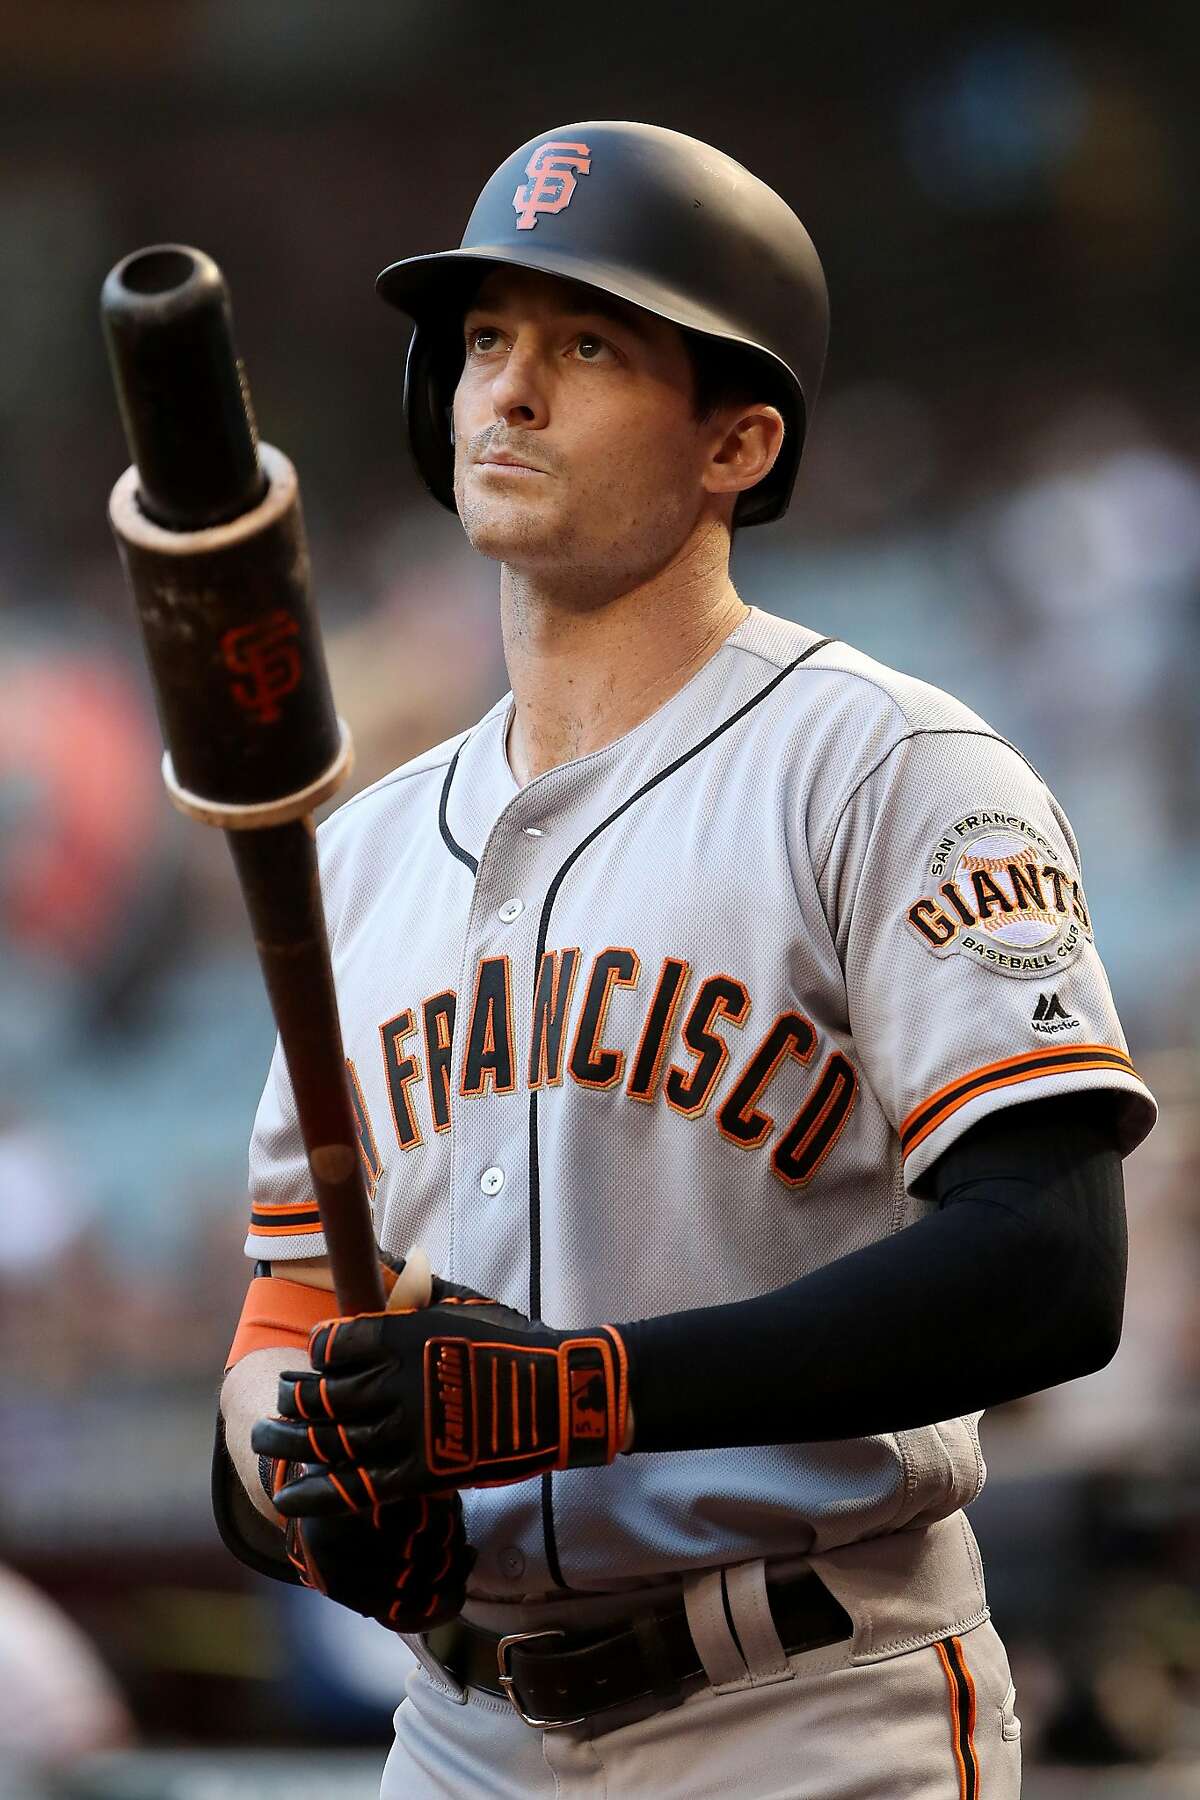 MLB: Orioles' Mike Yastrzemski trying to live up to family name